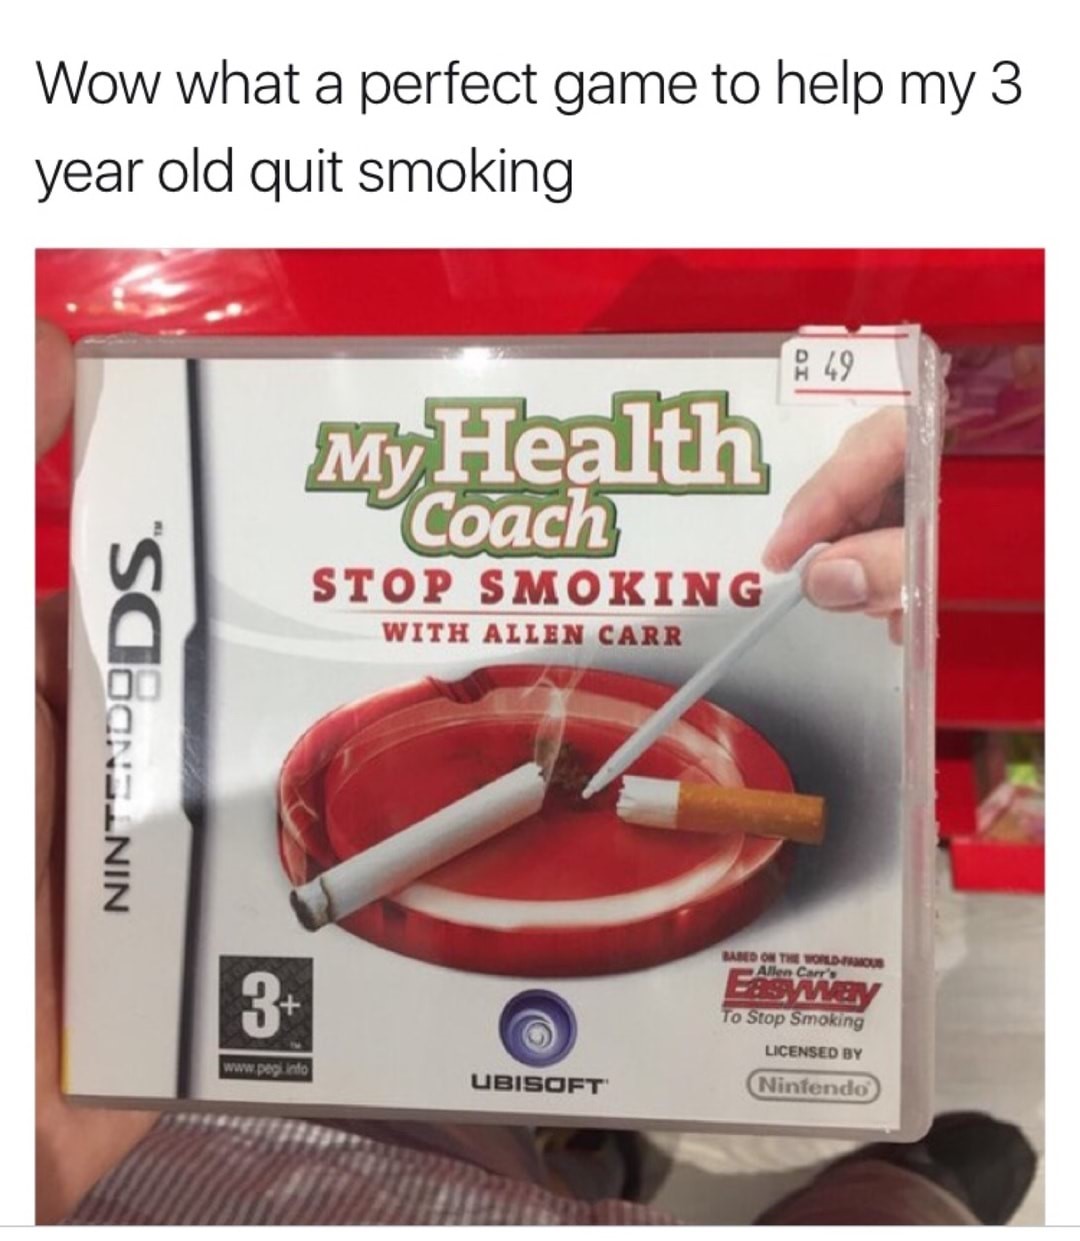 memes - have several questions meme - Wow what a perfect game to help my 3 year old quit smoking A 49 My Health Coach Stop Smoking With Allen Carr "SCons_NIN Bared On The The World As We To Stop Smoking Licensed By Info Ubisoft Nintendo